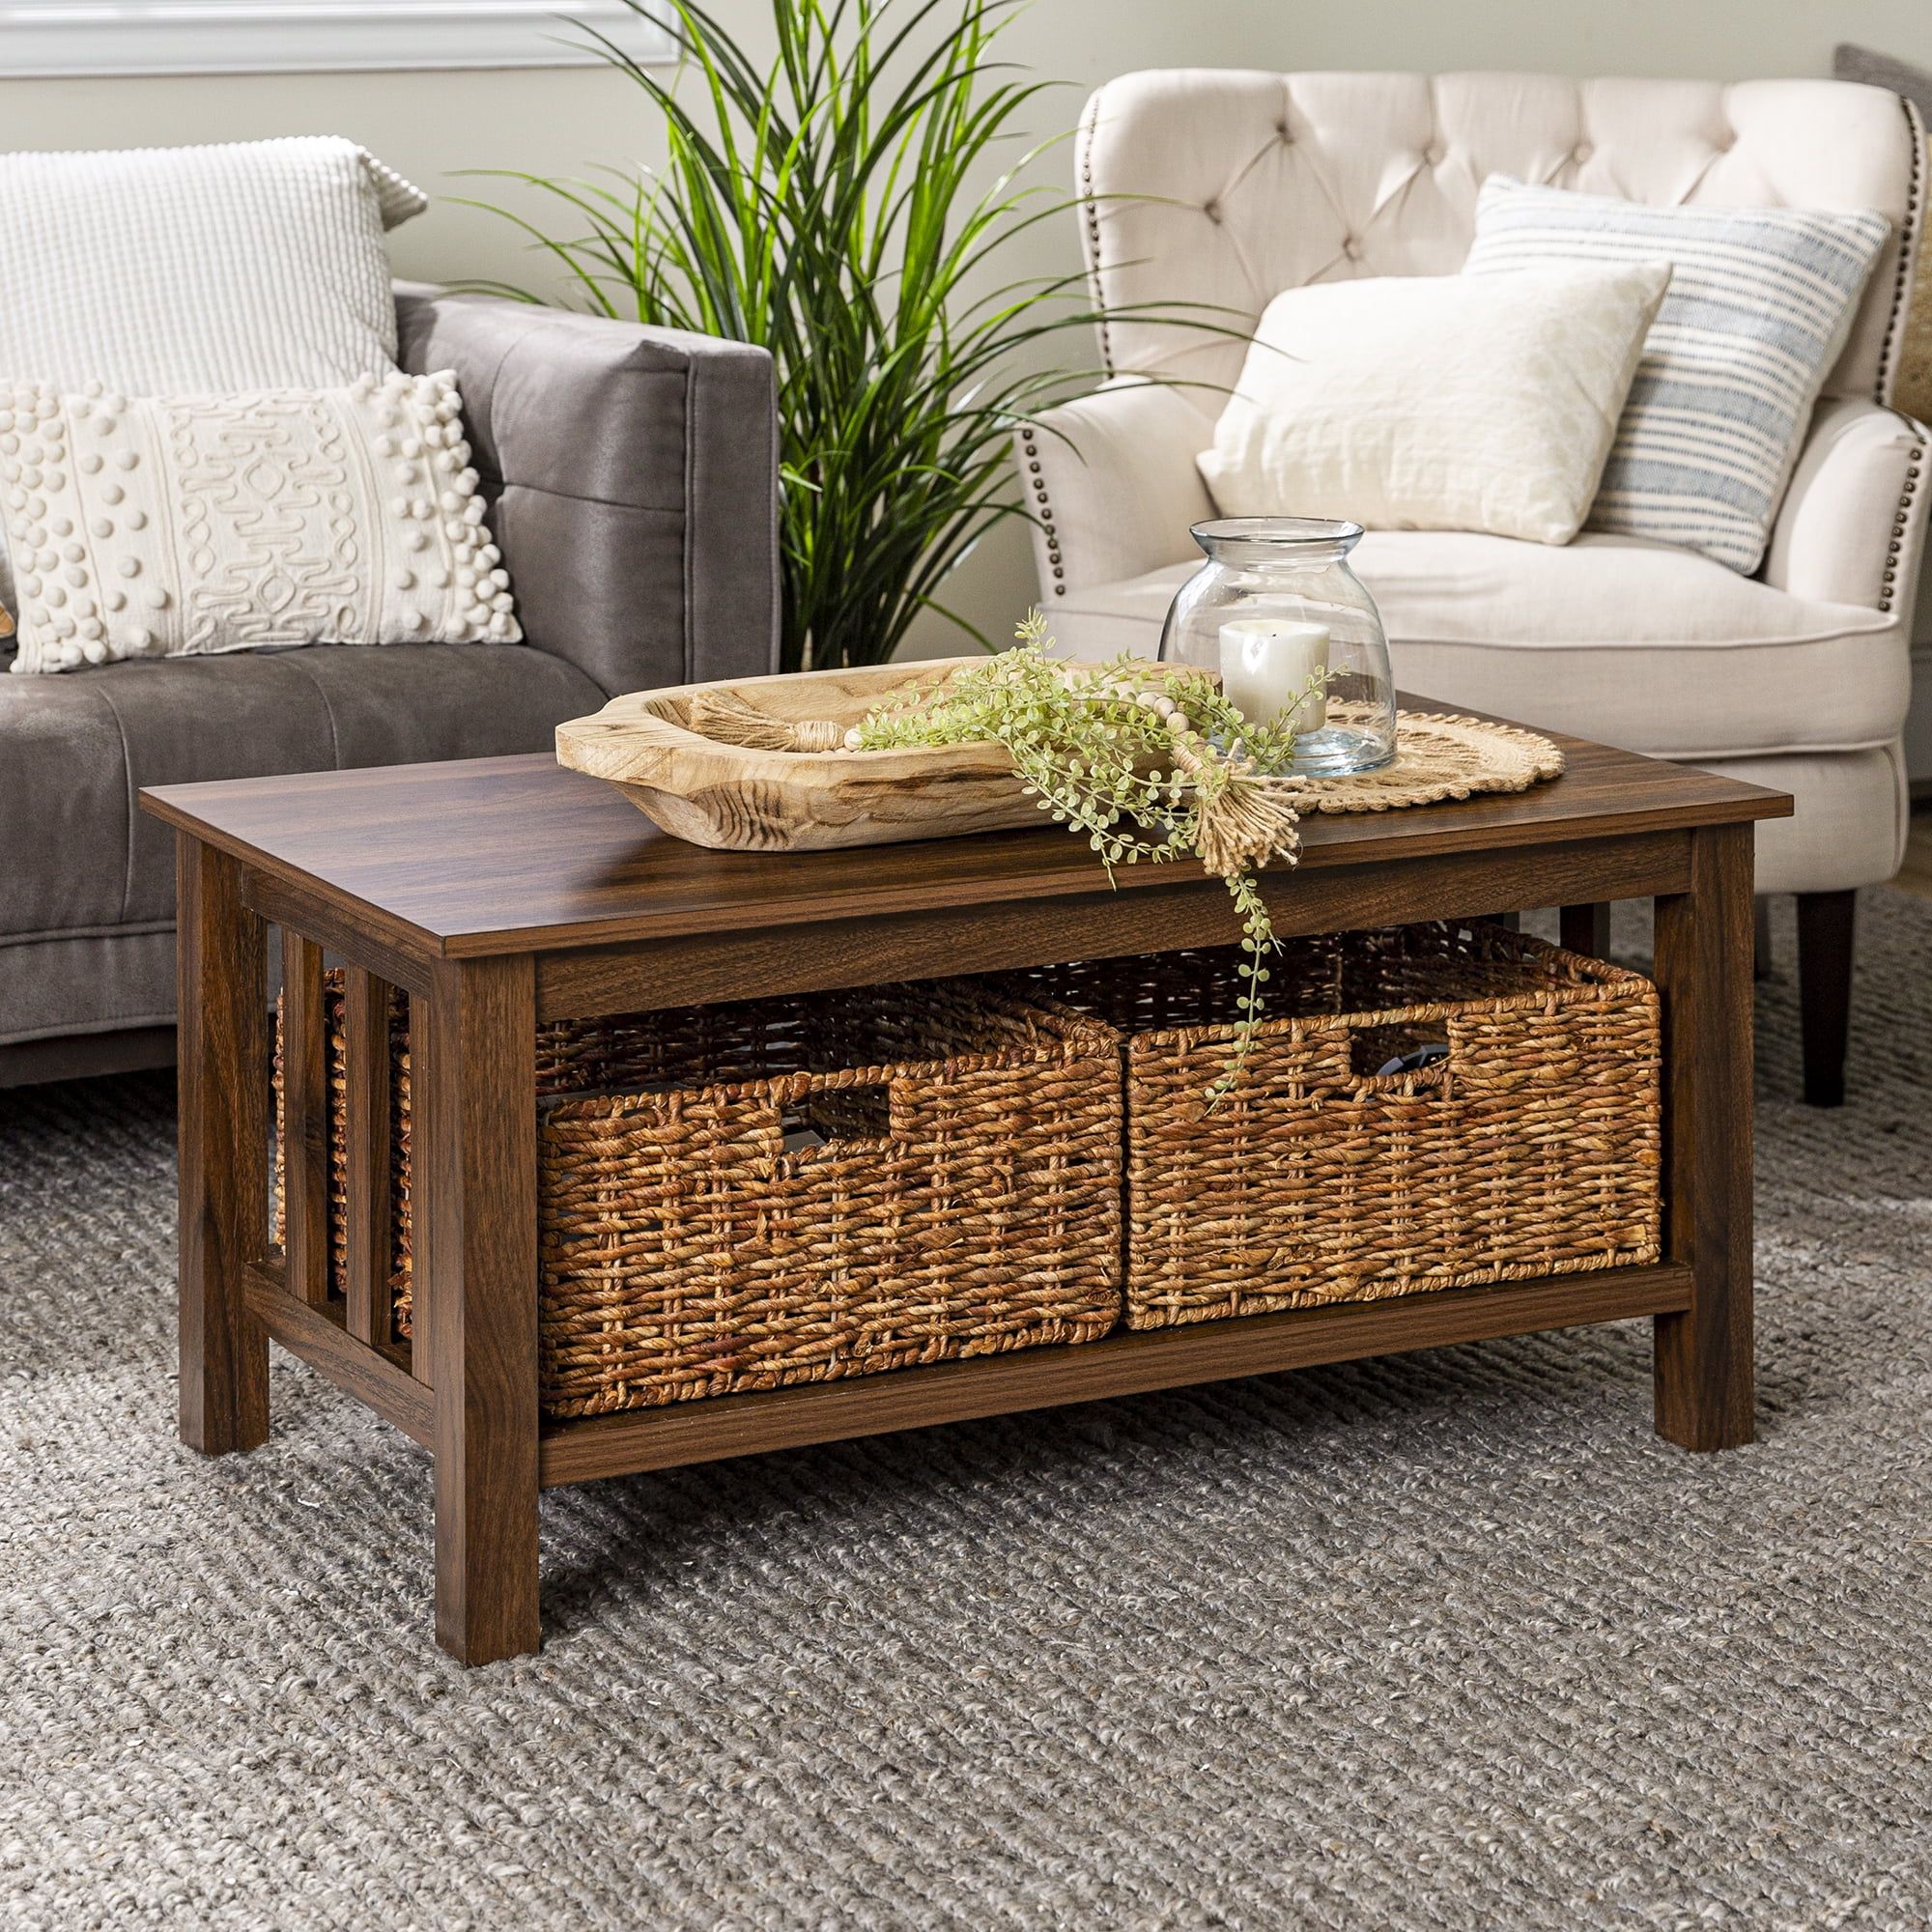 Woven Paths Traditional Storage Coffee Table With Totes, Dark Walnut –  Walmart For Woven Paths Coffee Tables (View 4 of 15)